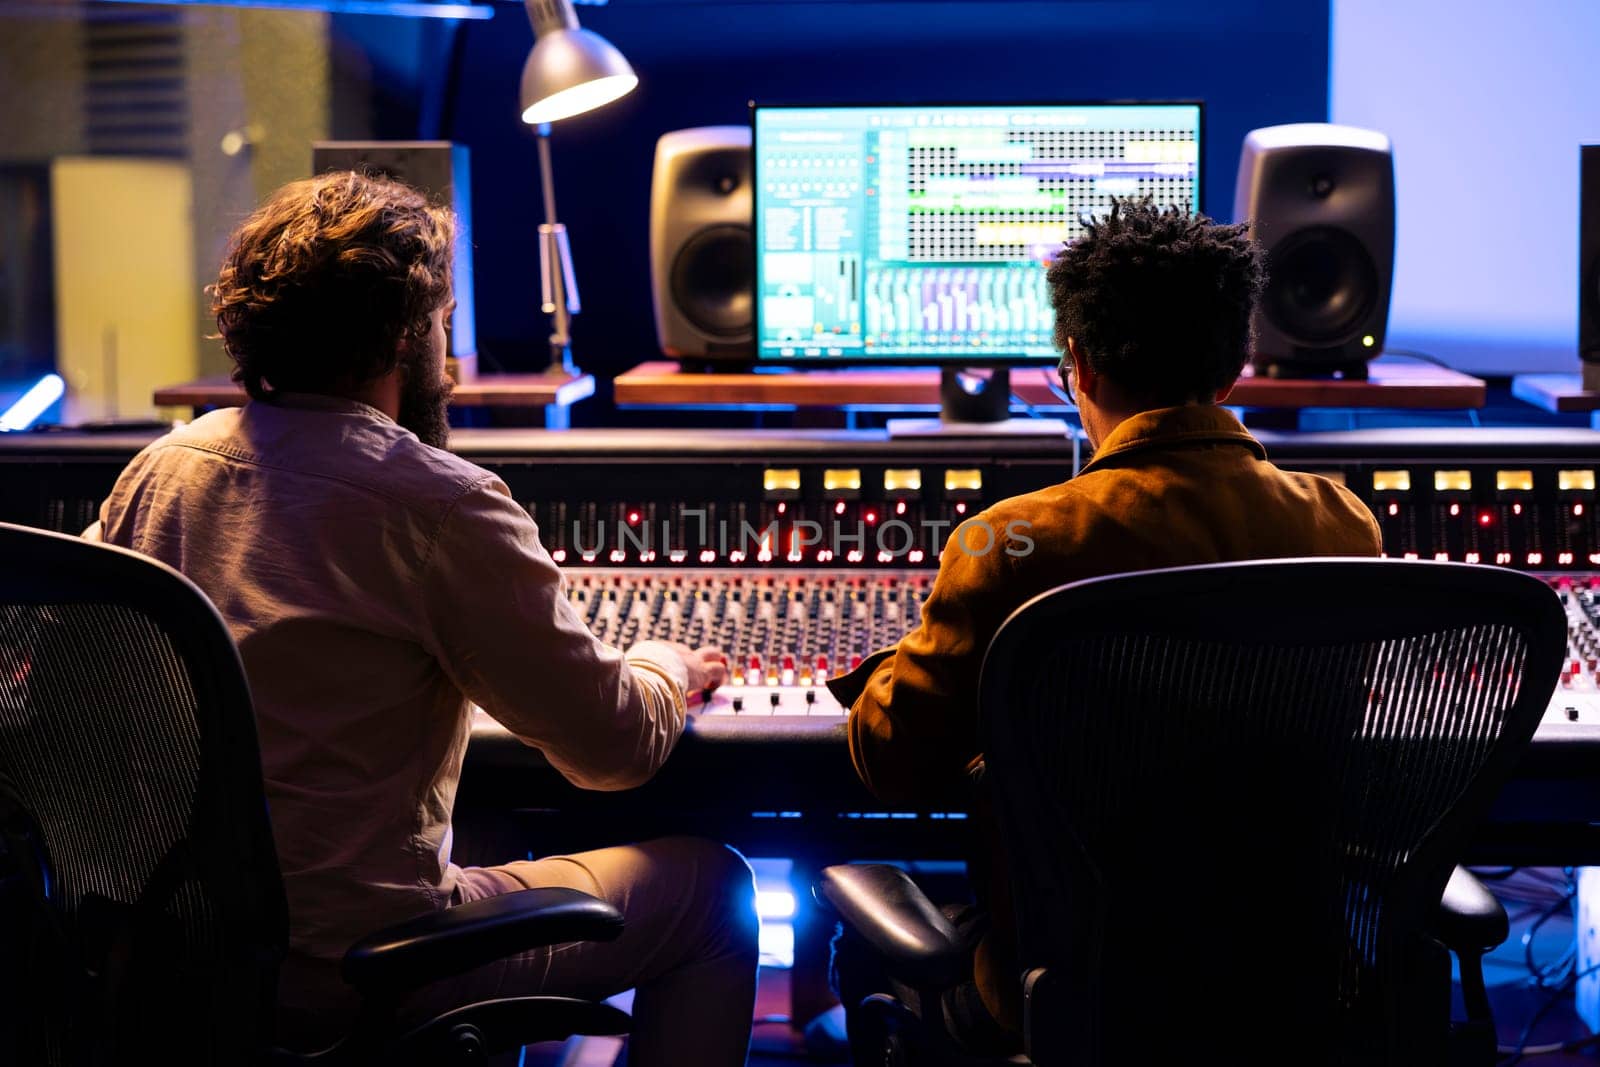 Singer and producer working together in professional music studio, collaborating on a hit song in control room. Audio engineer editing records with mixing and mastering techniques.